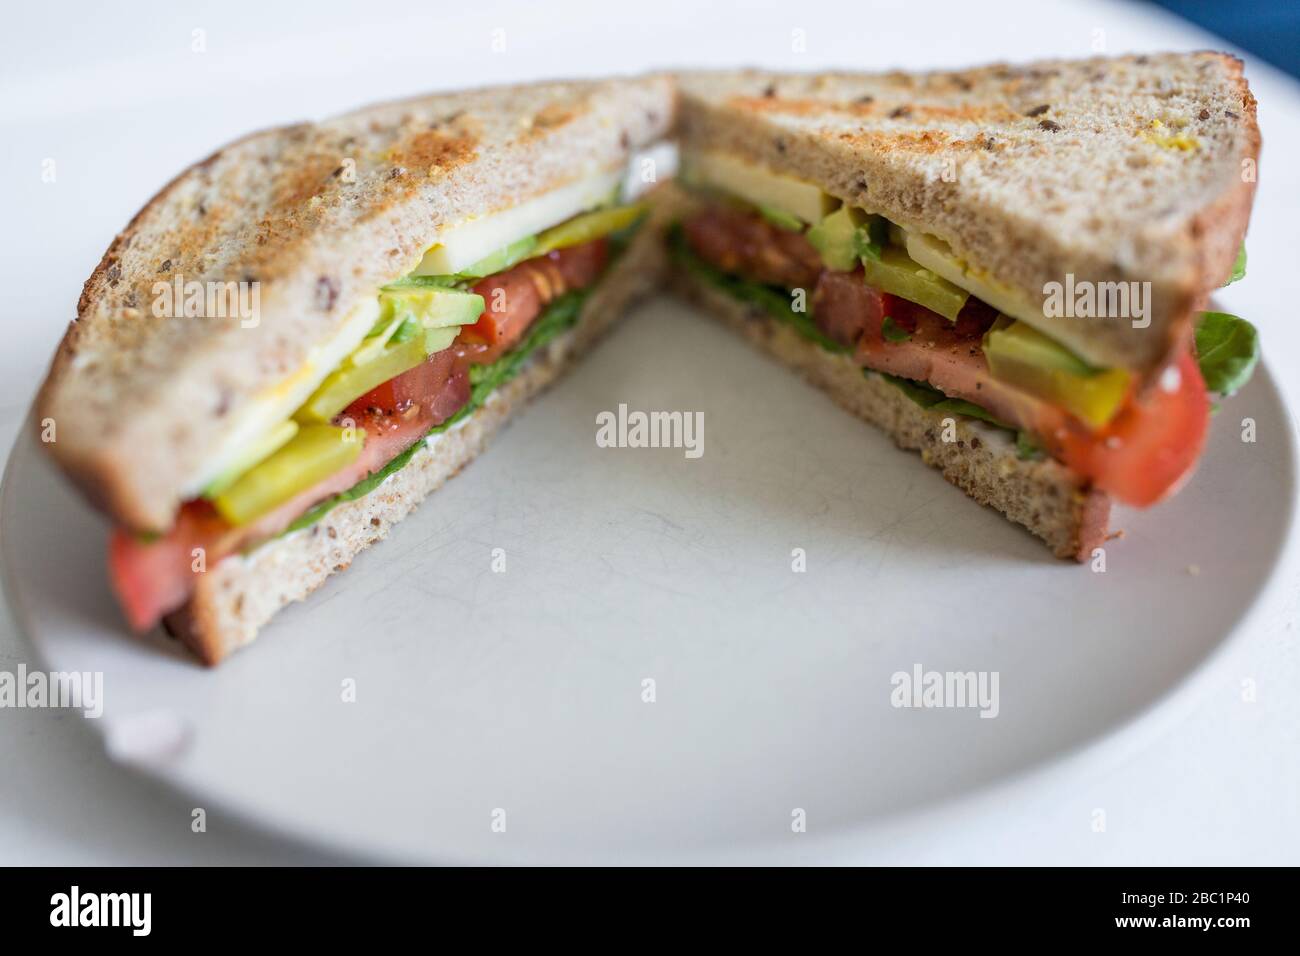 A vegetarian sandwich with avocado and tomato on whole wheat bread ready for a healthy, delicious lunch. Stock Photo